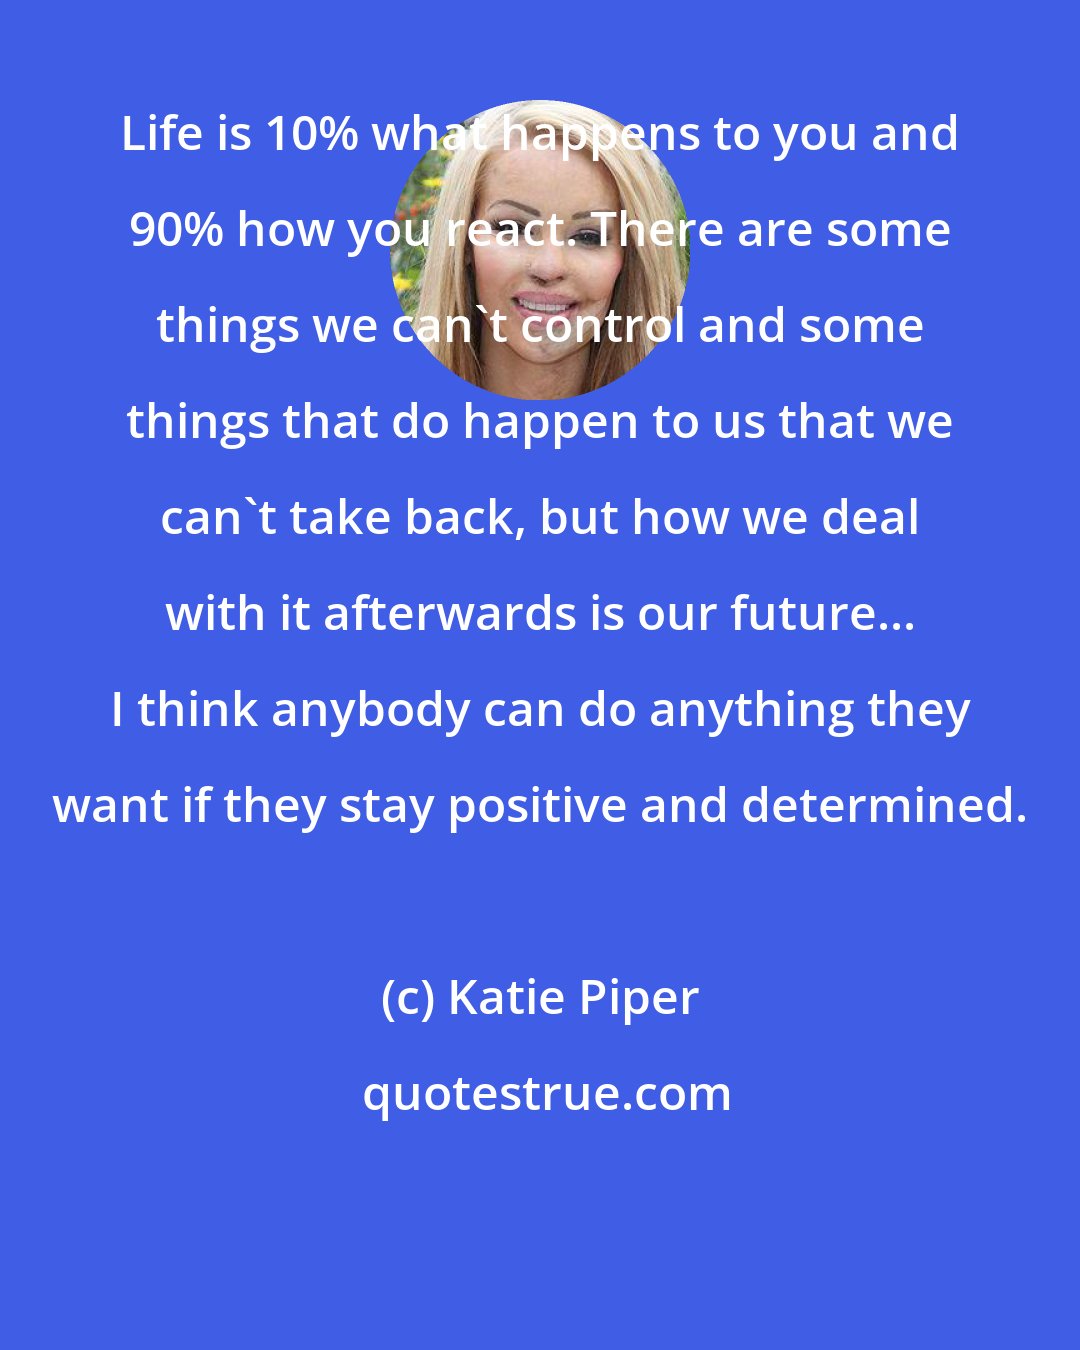 Katie Piper: Life is 10% what happens to you and 90% how you react. There are some things we can't control and some things that do happen to us that we can't take back, but how we deal with it afterwards is our future... I think anybody can do anything they want if they stay positive and determined.